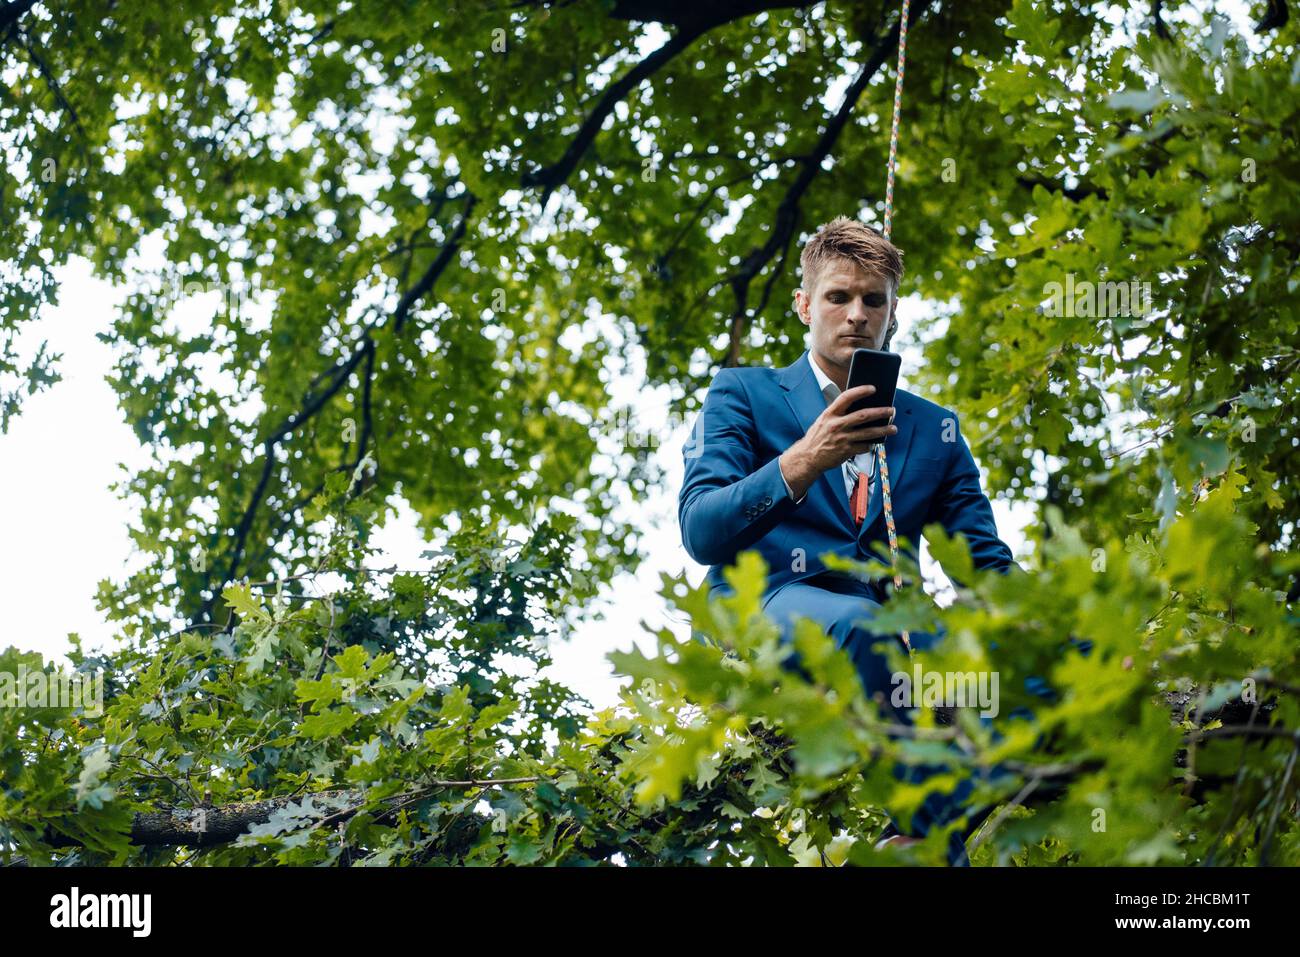 Businessman tied up with rope relaxing on tree branch using mobile phone Stock Photo